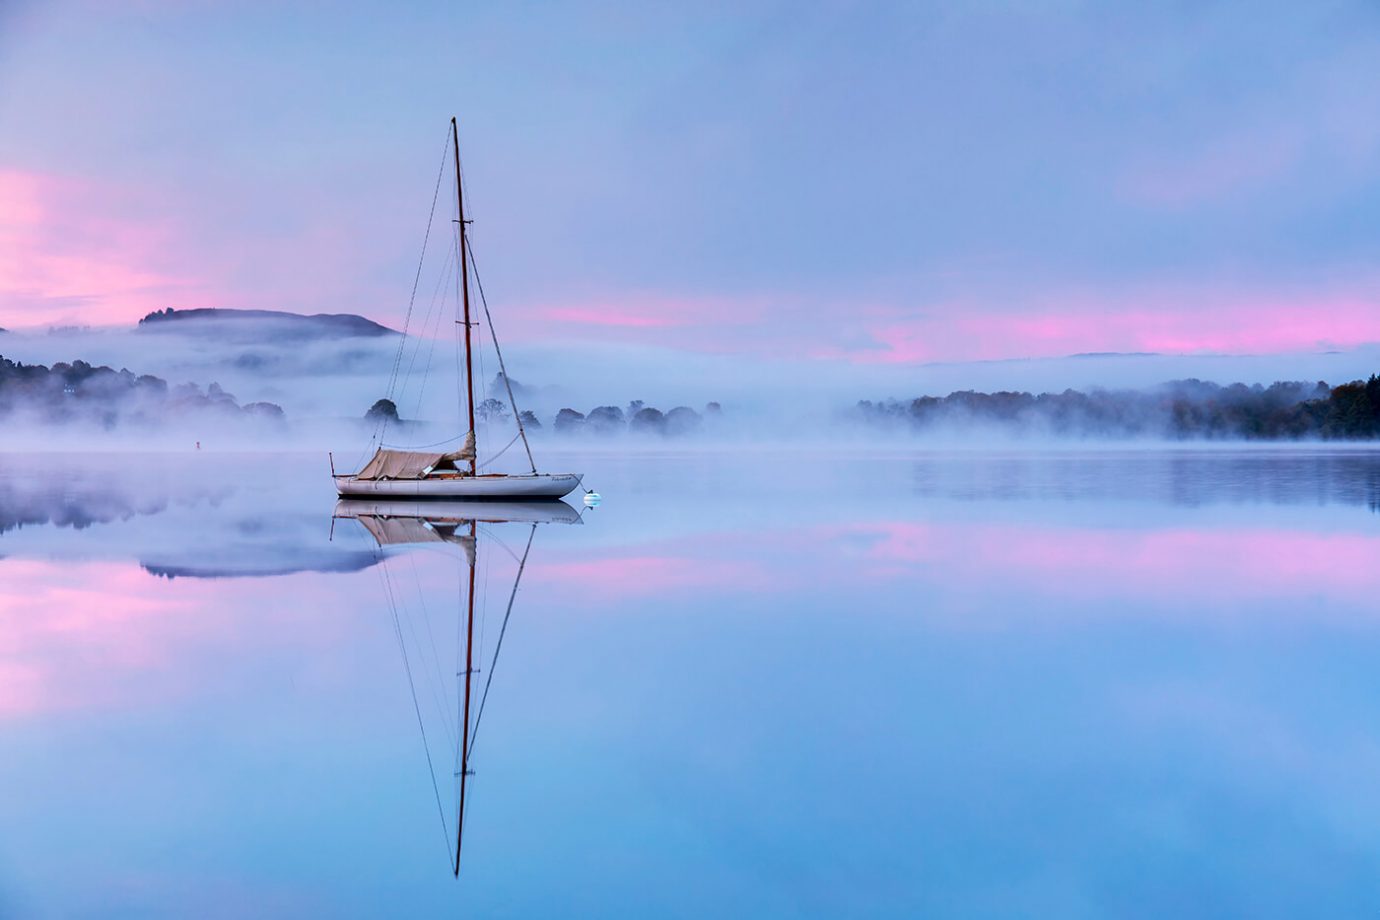 Sailing Boat, Misty Morning, Waterhead, Windermere, Lake District